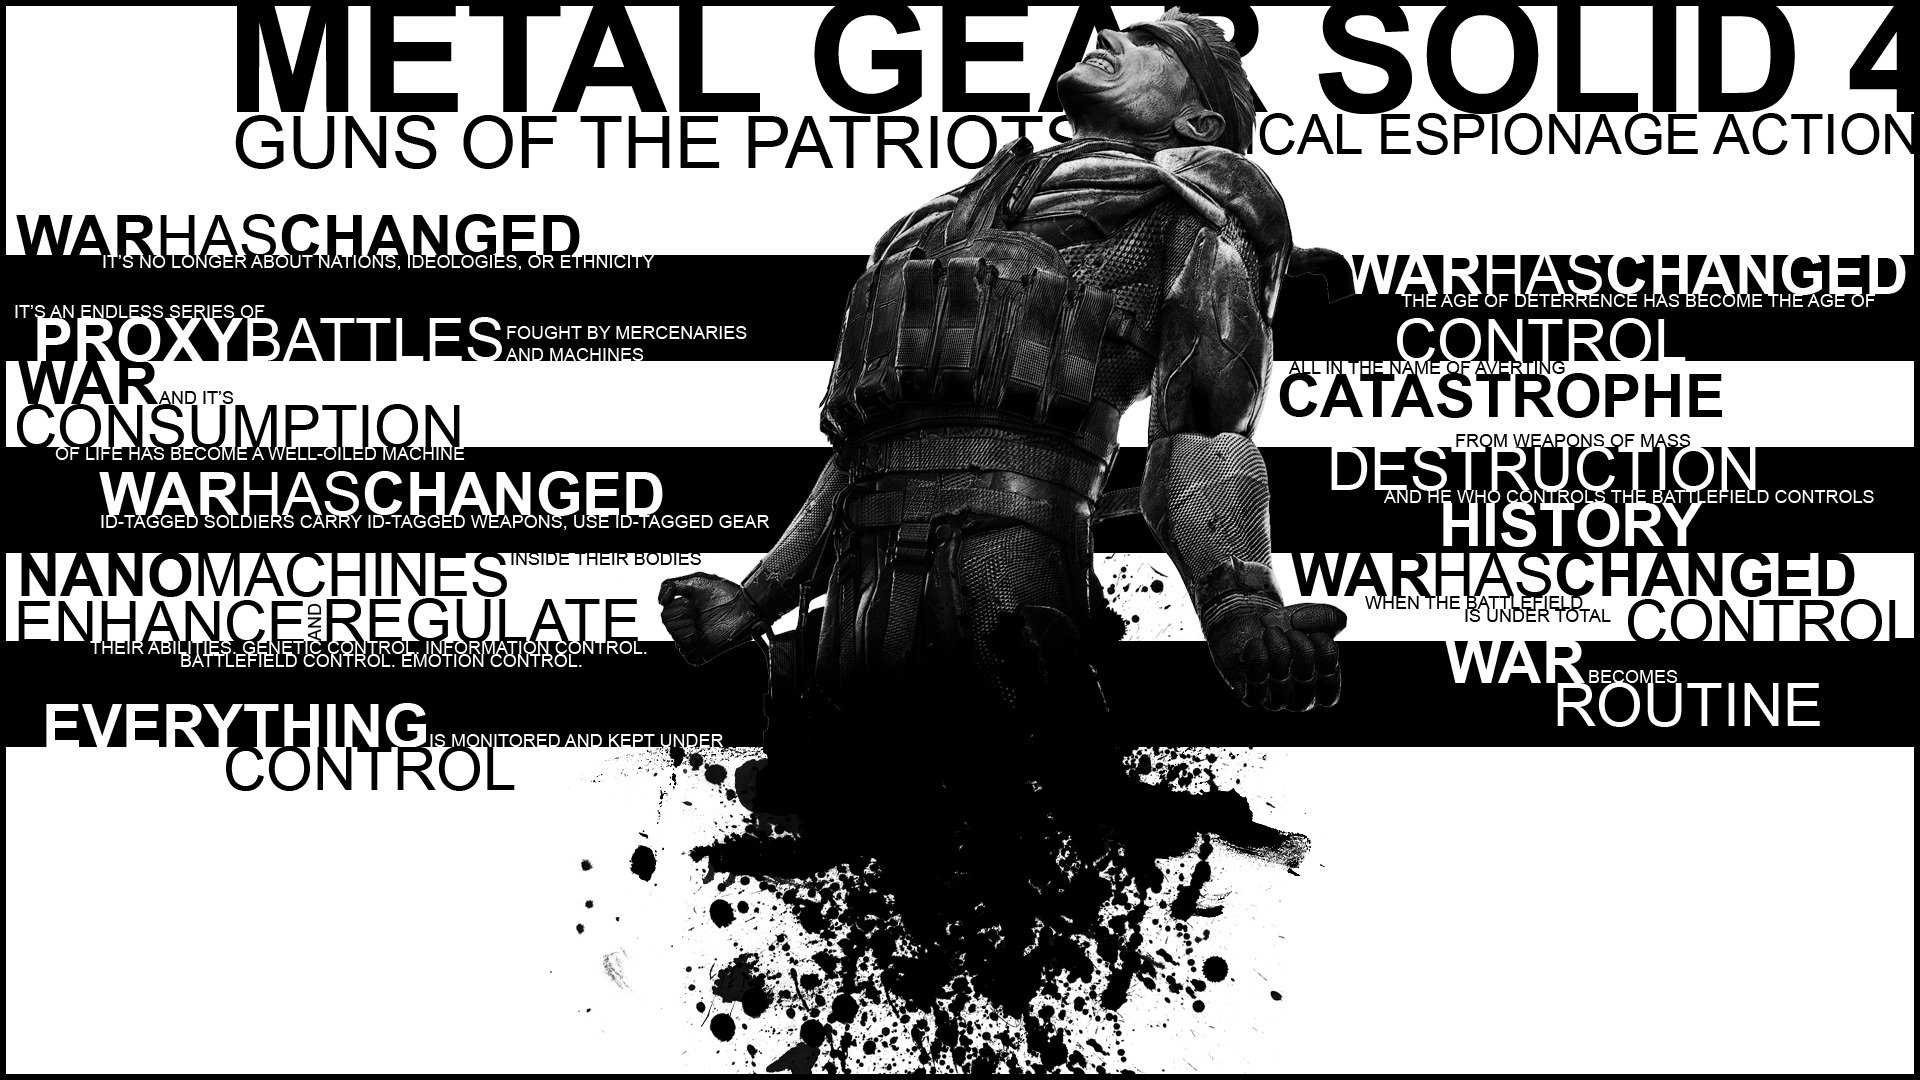 Metal Gear Solid 4 Guns of the Patriots MGS4 Metal Gear Solid Ranking MGS Ranking Metal Gear Solid Rückblick Metal Gear Solid Retrospektive Metal Gear Solid Retrospective MGS Rückblick MGS Retrospektive MGS Retrospective